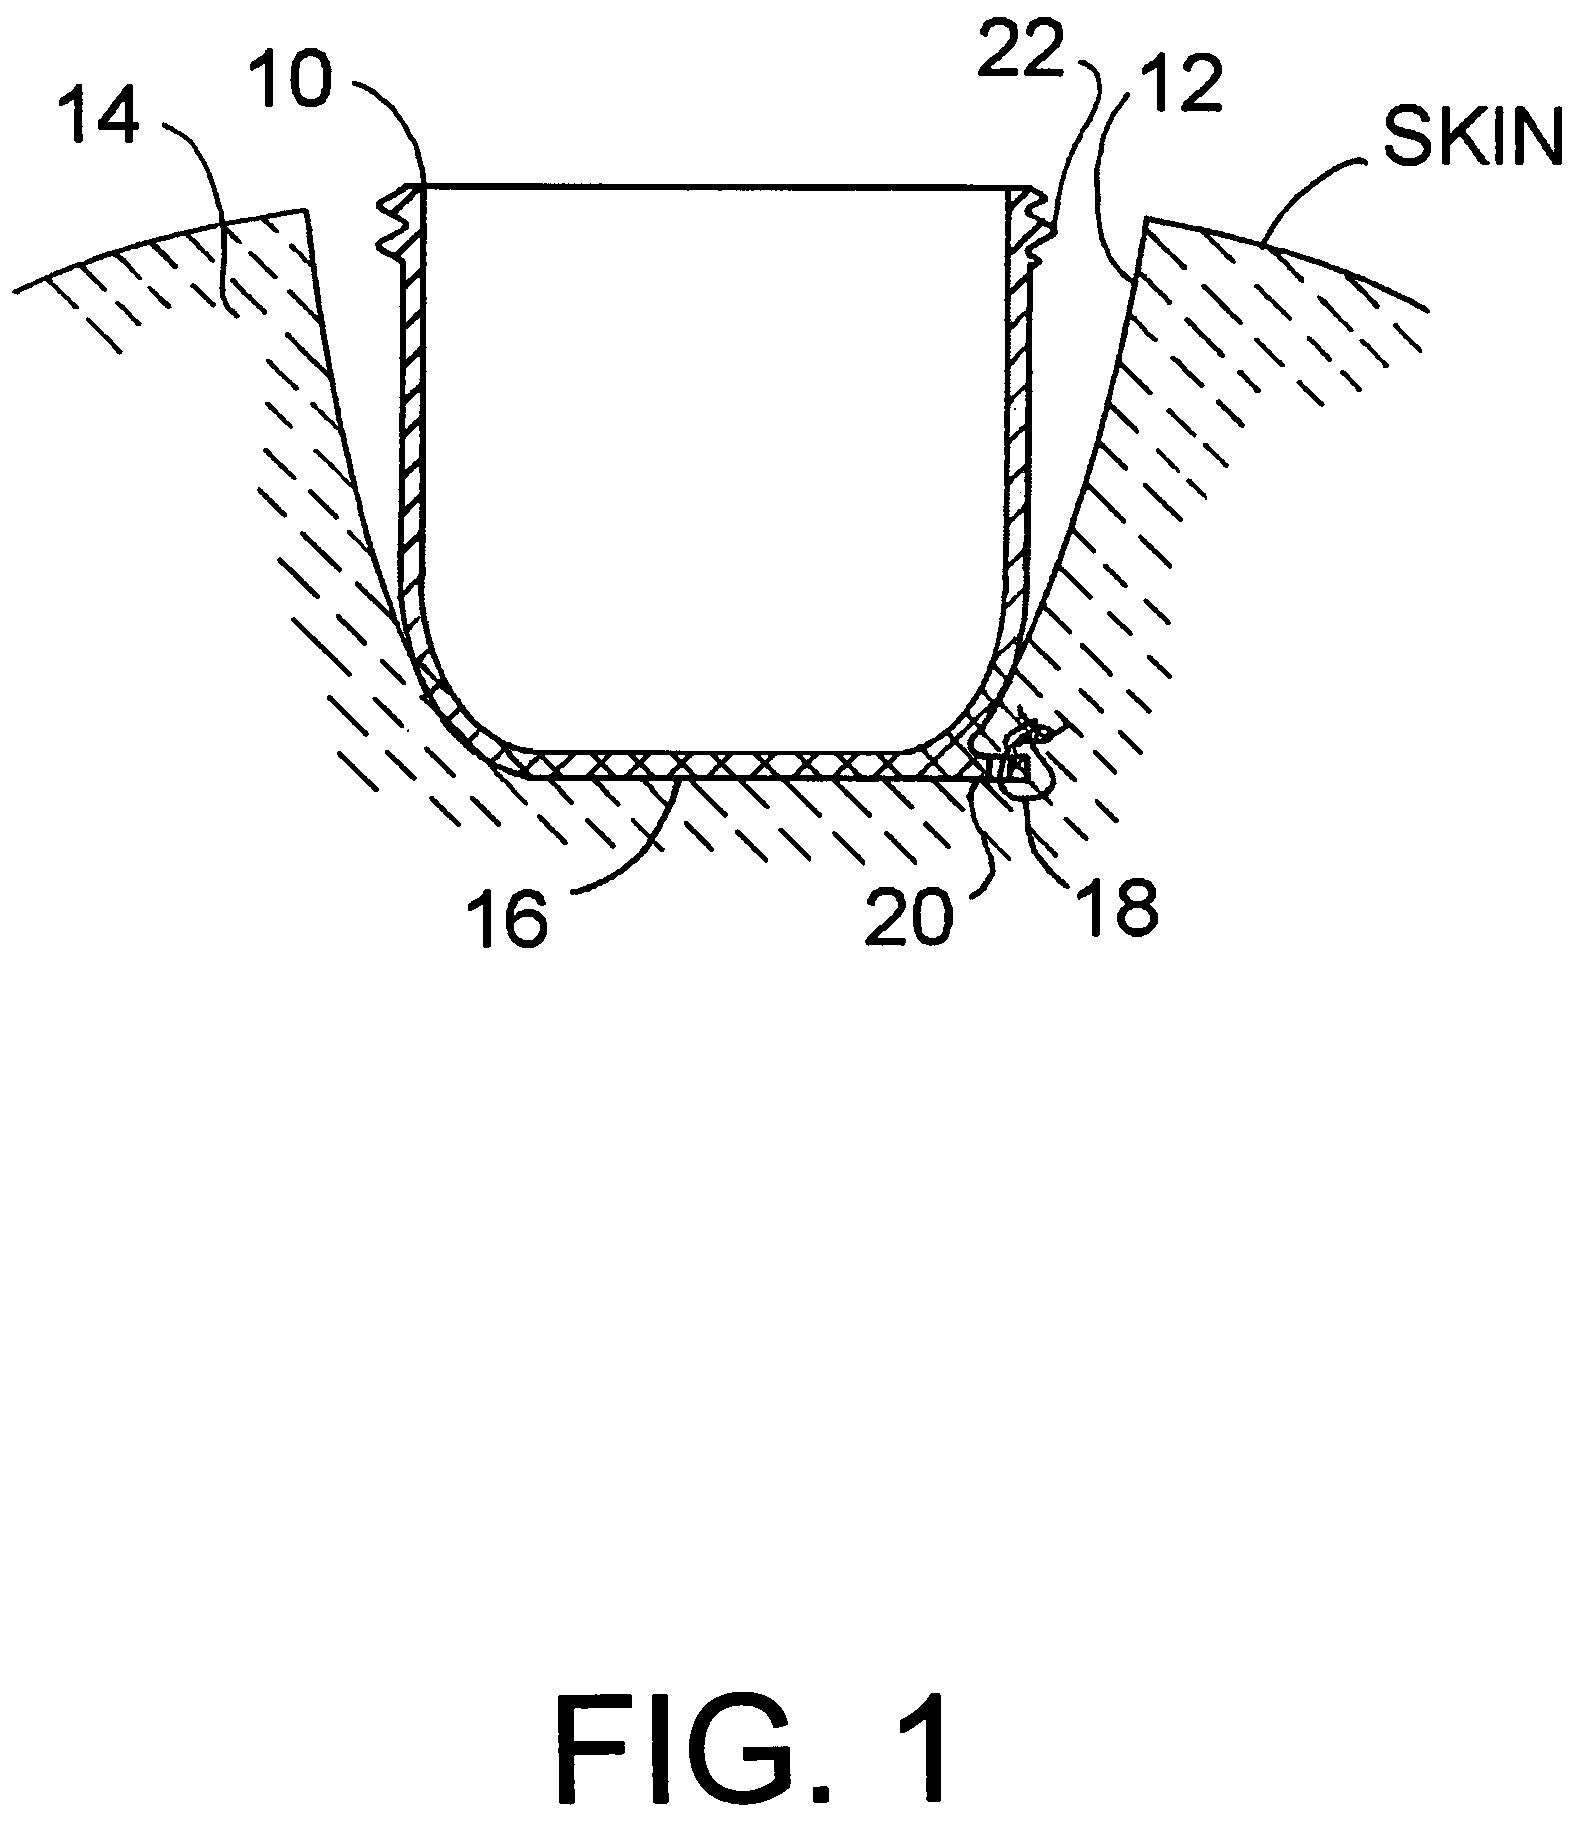 Applicators and methods for intraoperative treatment of proliferative diseases of the breast